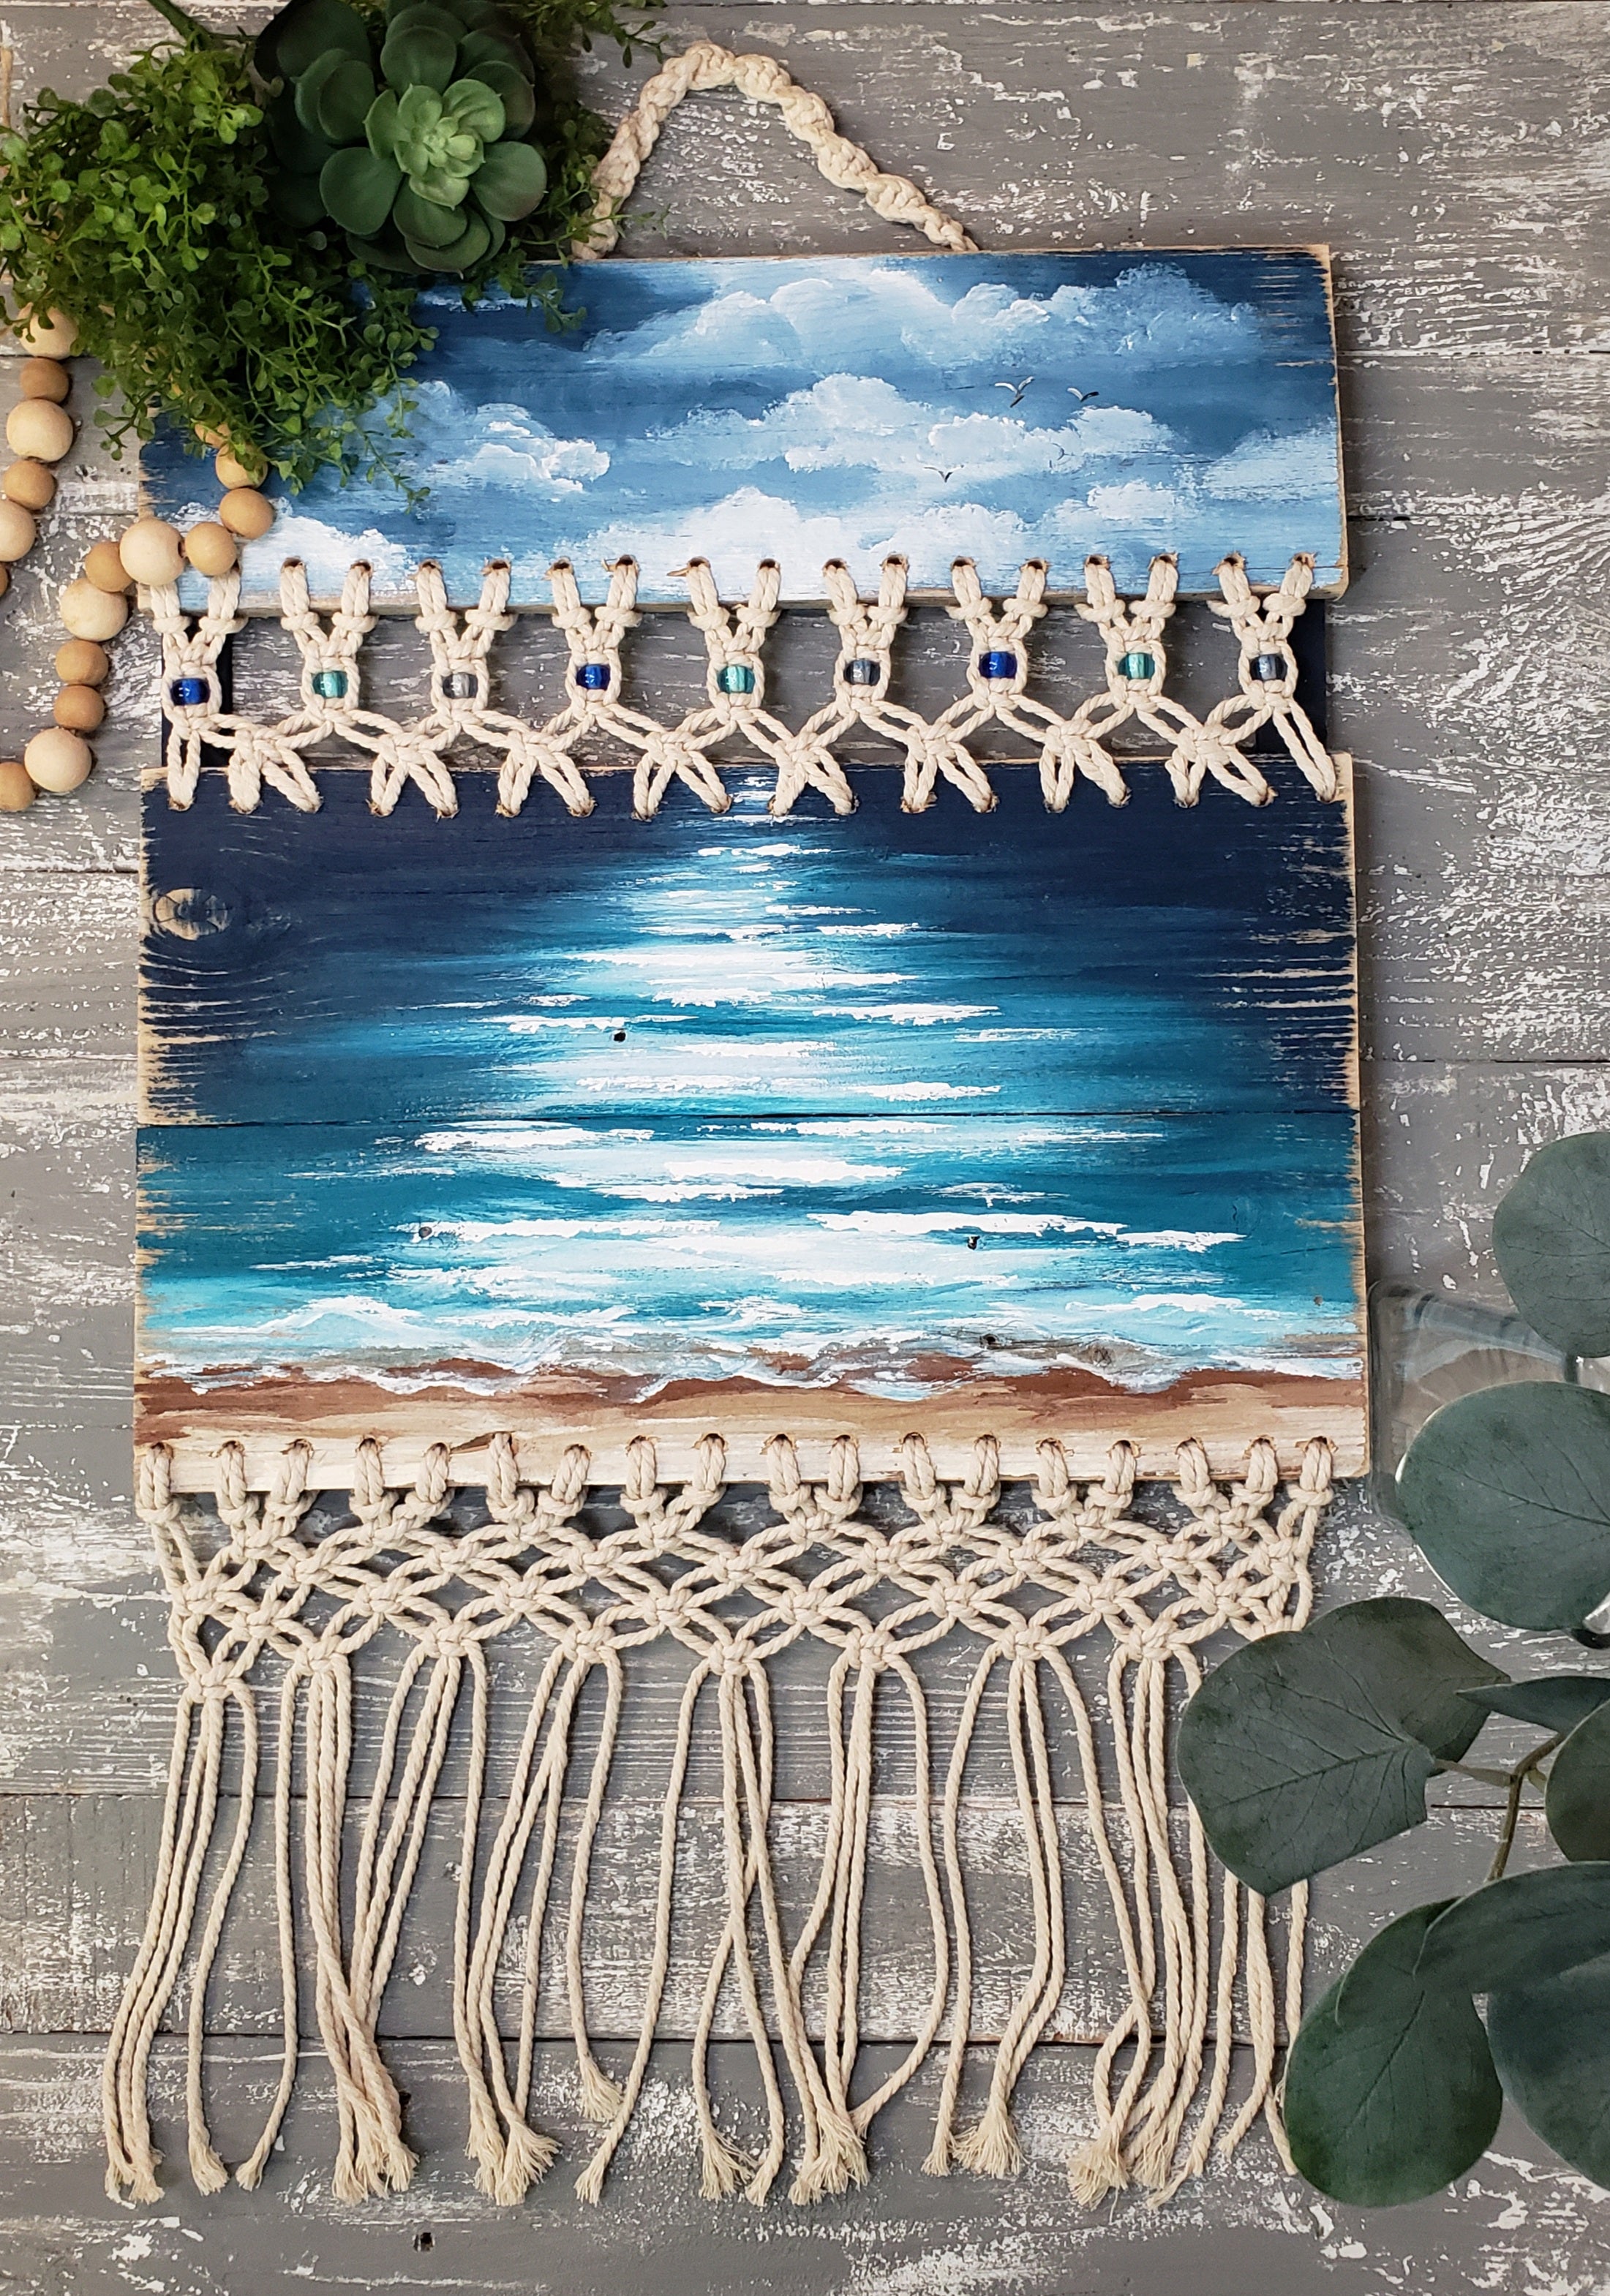 BOHO Macrame Beach painting on pallet wood, beach life, Glass beads, hand painted nautical ocean painting, cottage decorations